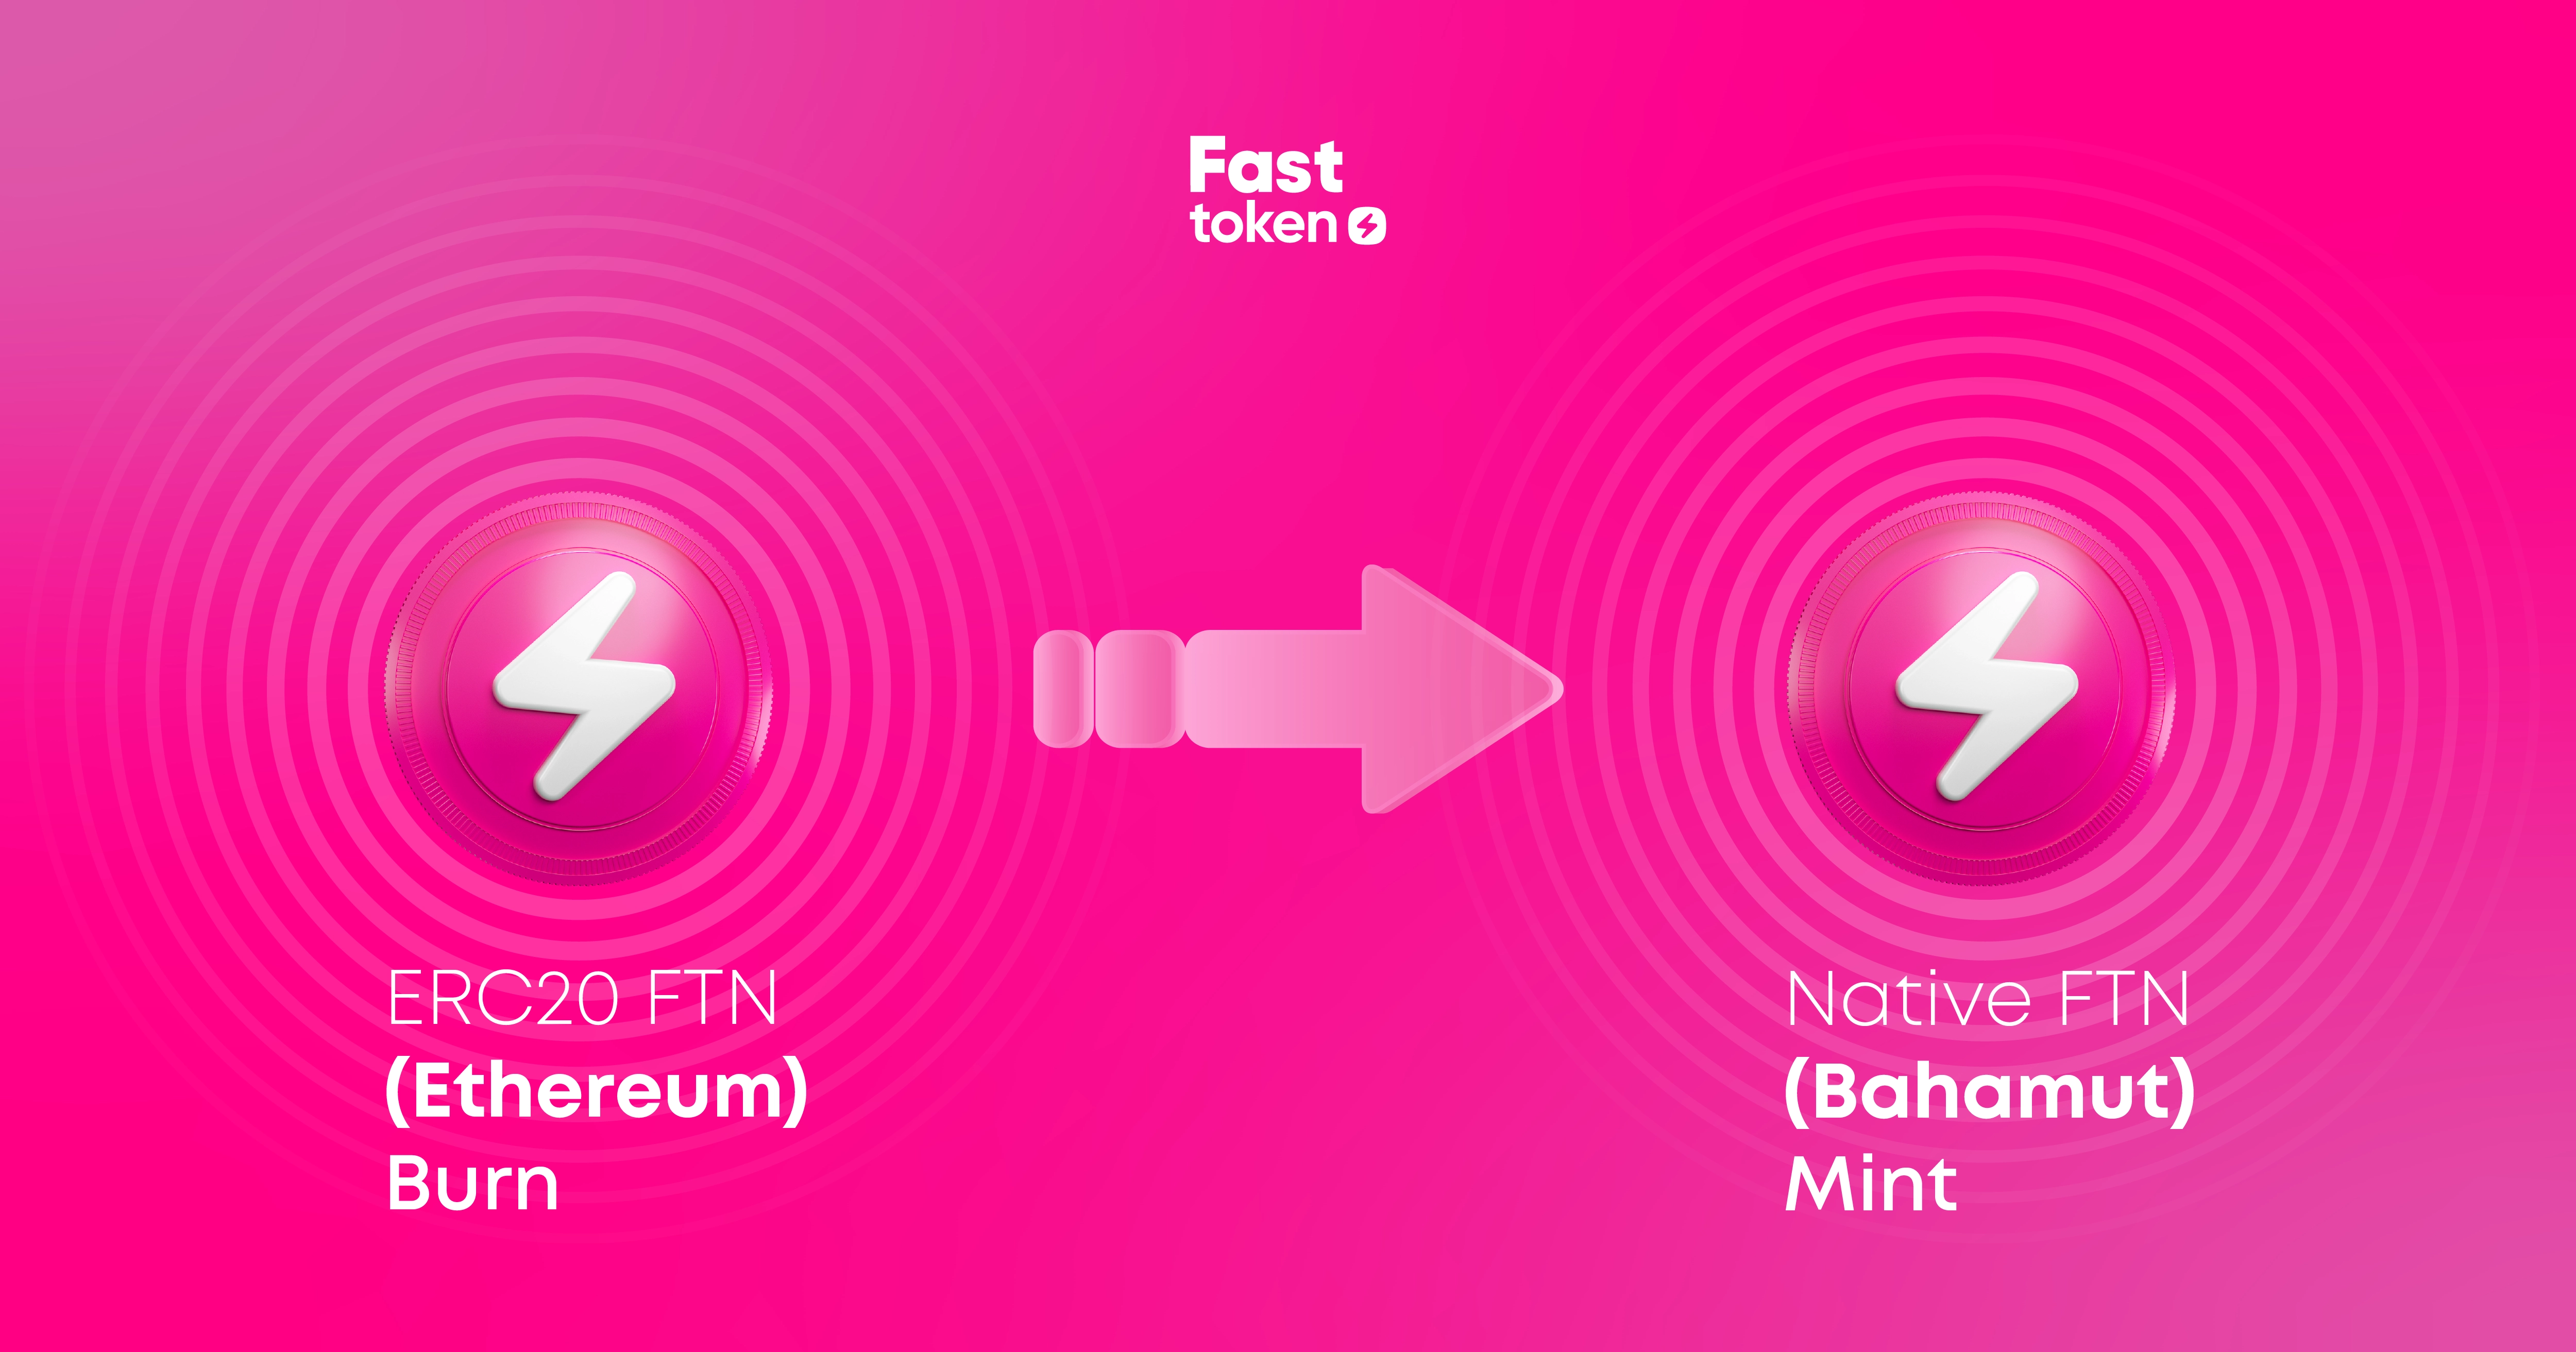 Fastex Enables Fasttoken (FTN) Owners to Transfer Tokens from the Ethereum Blockchain to Fastex Chain 